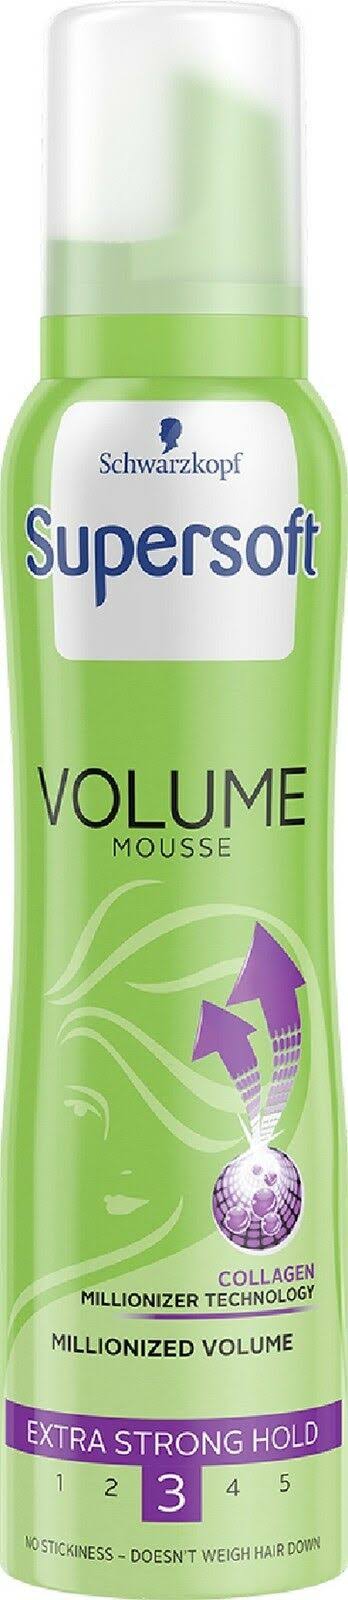 Schwarzkopf Supersoft Volume Extra Strong Hold Mousse